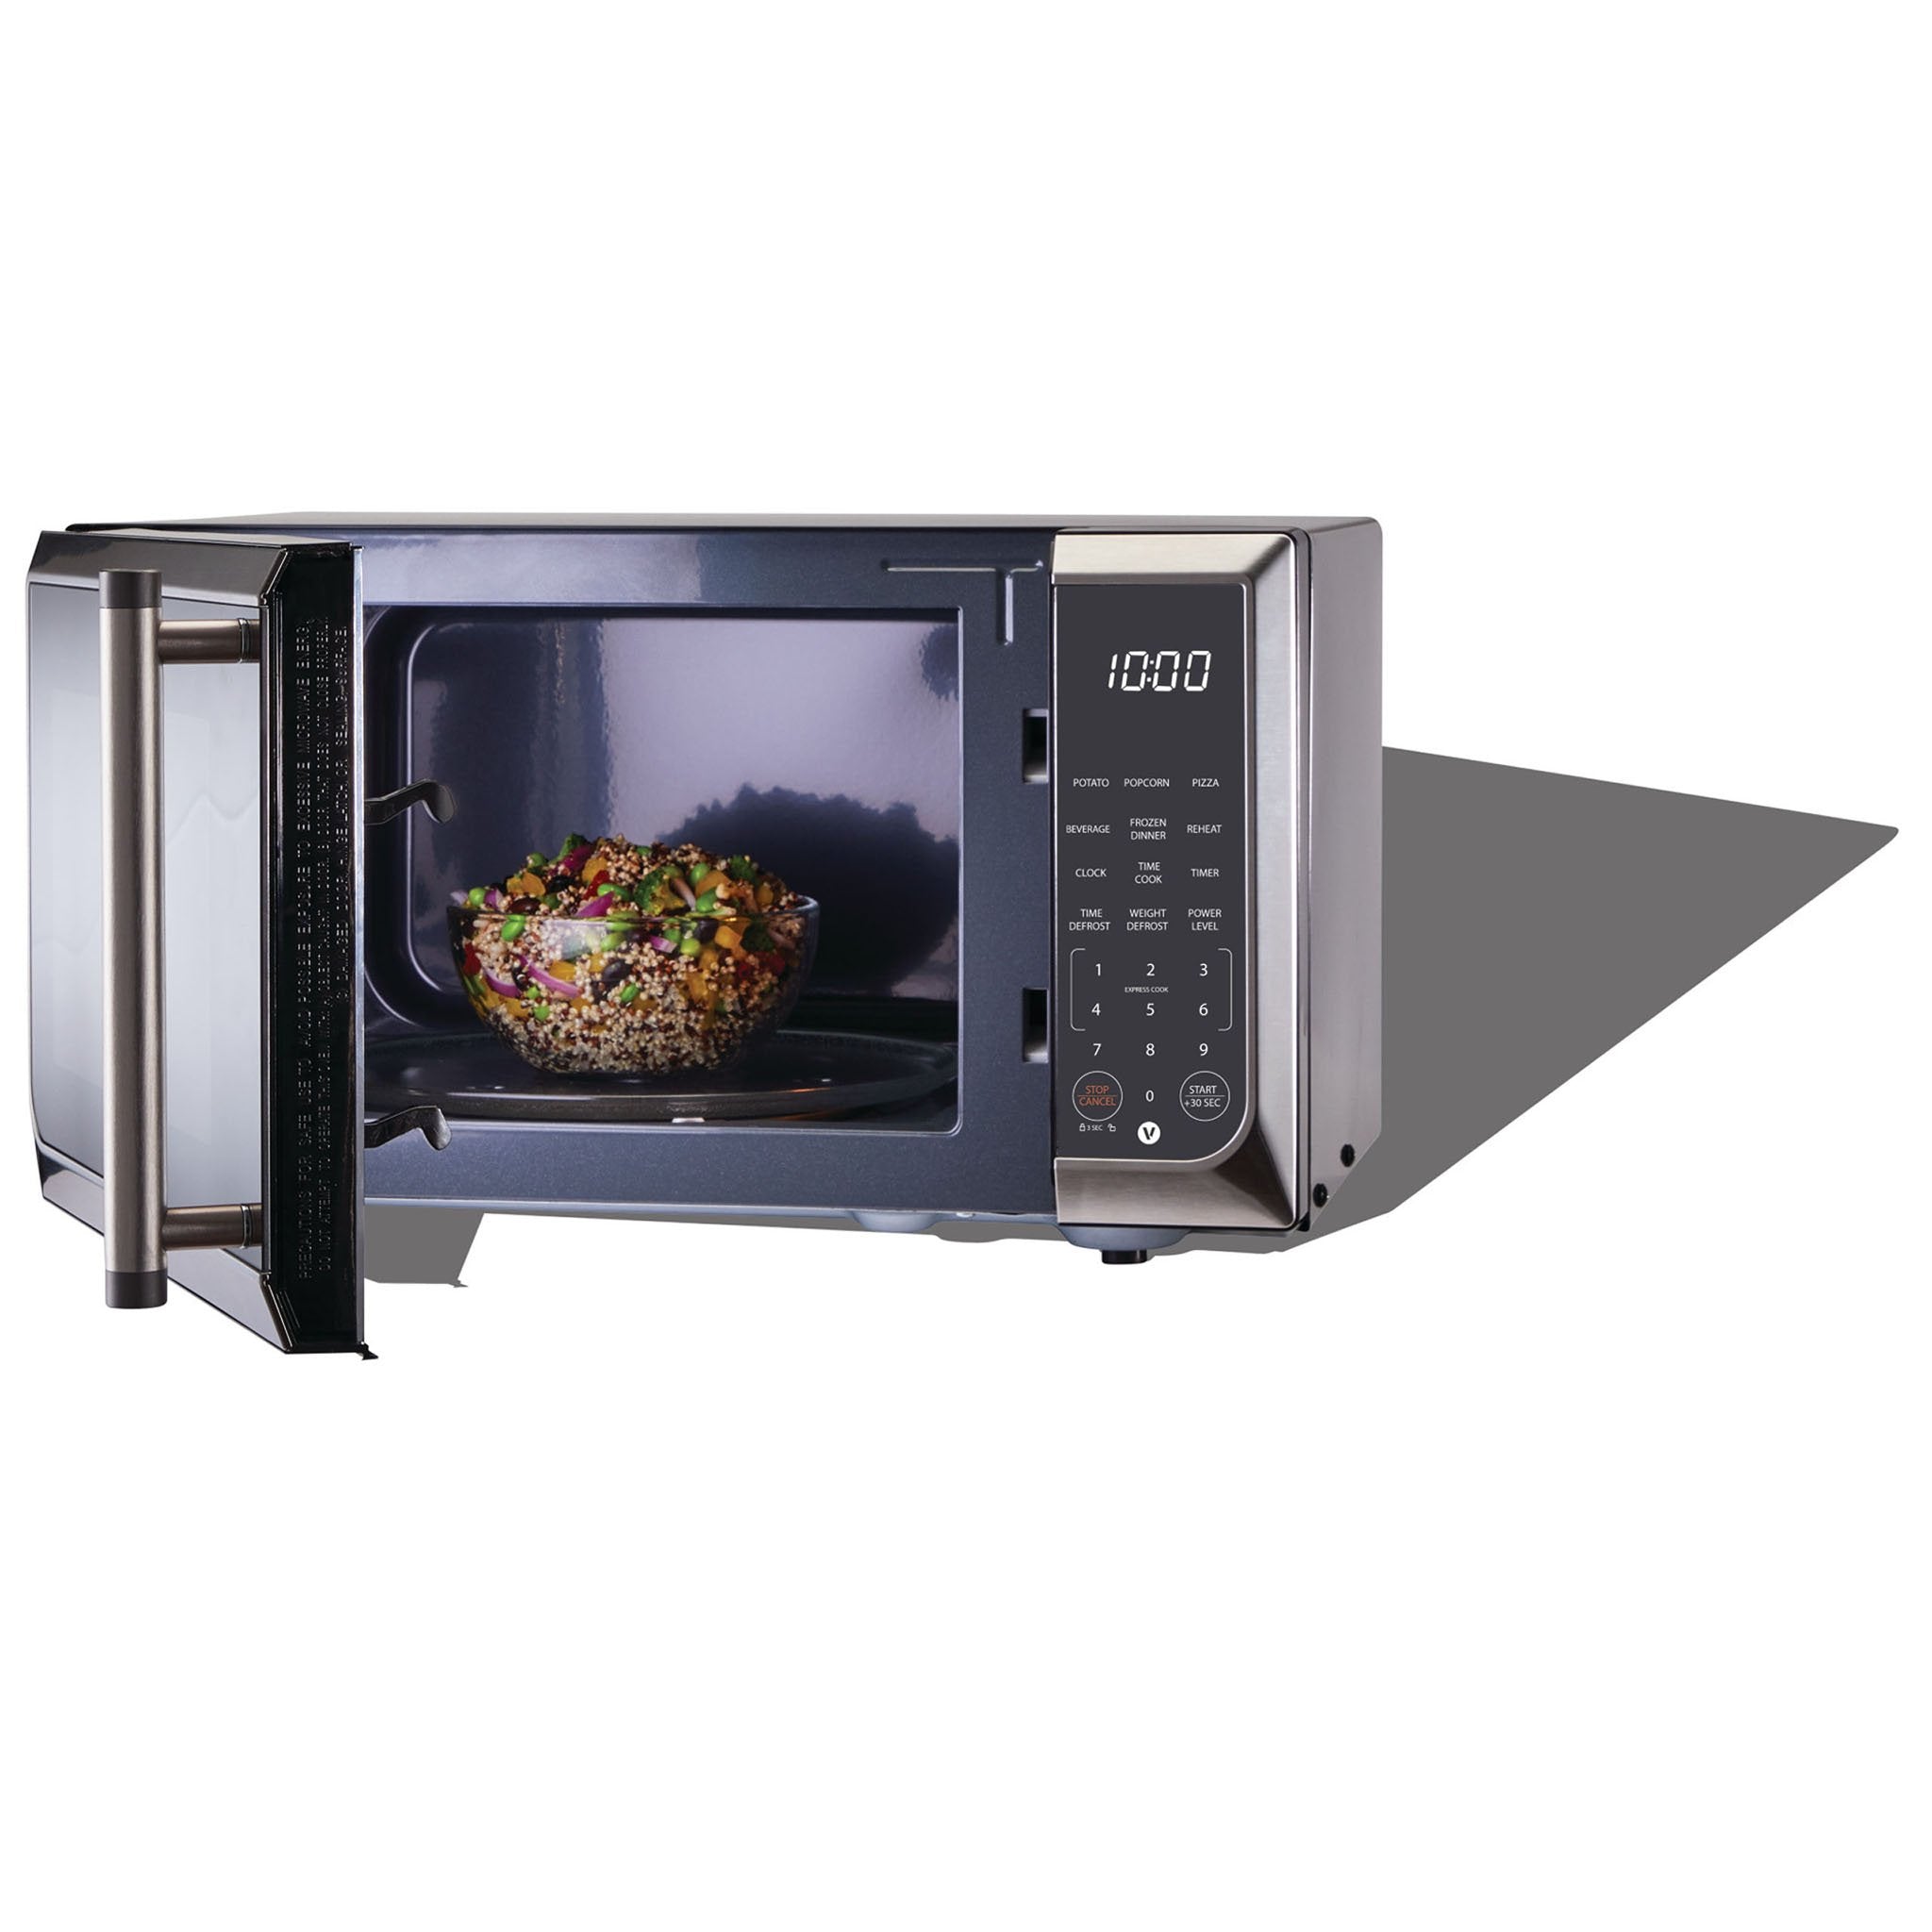 0.9-cu. ft. Stainless Steel Microwave Oven – Vida by PADERNO